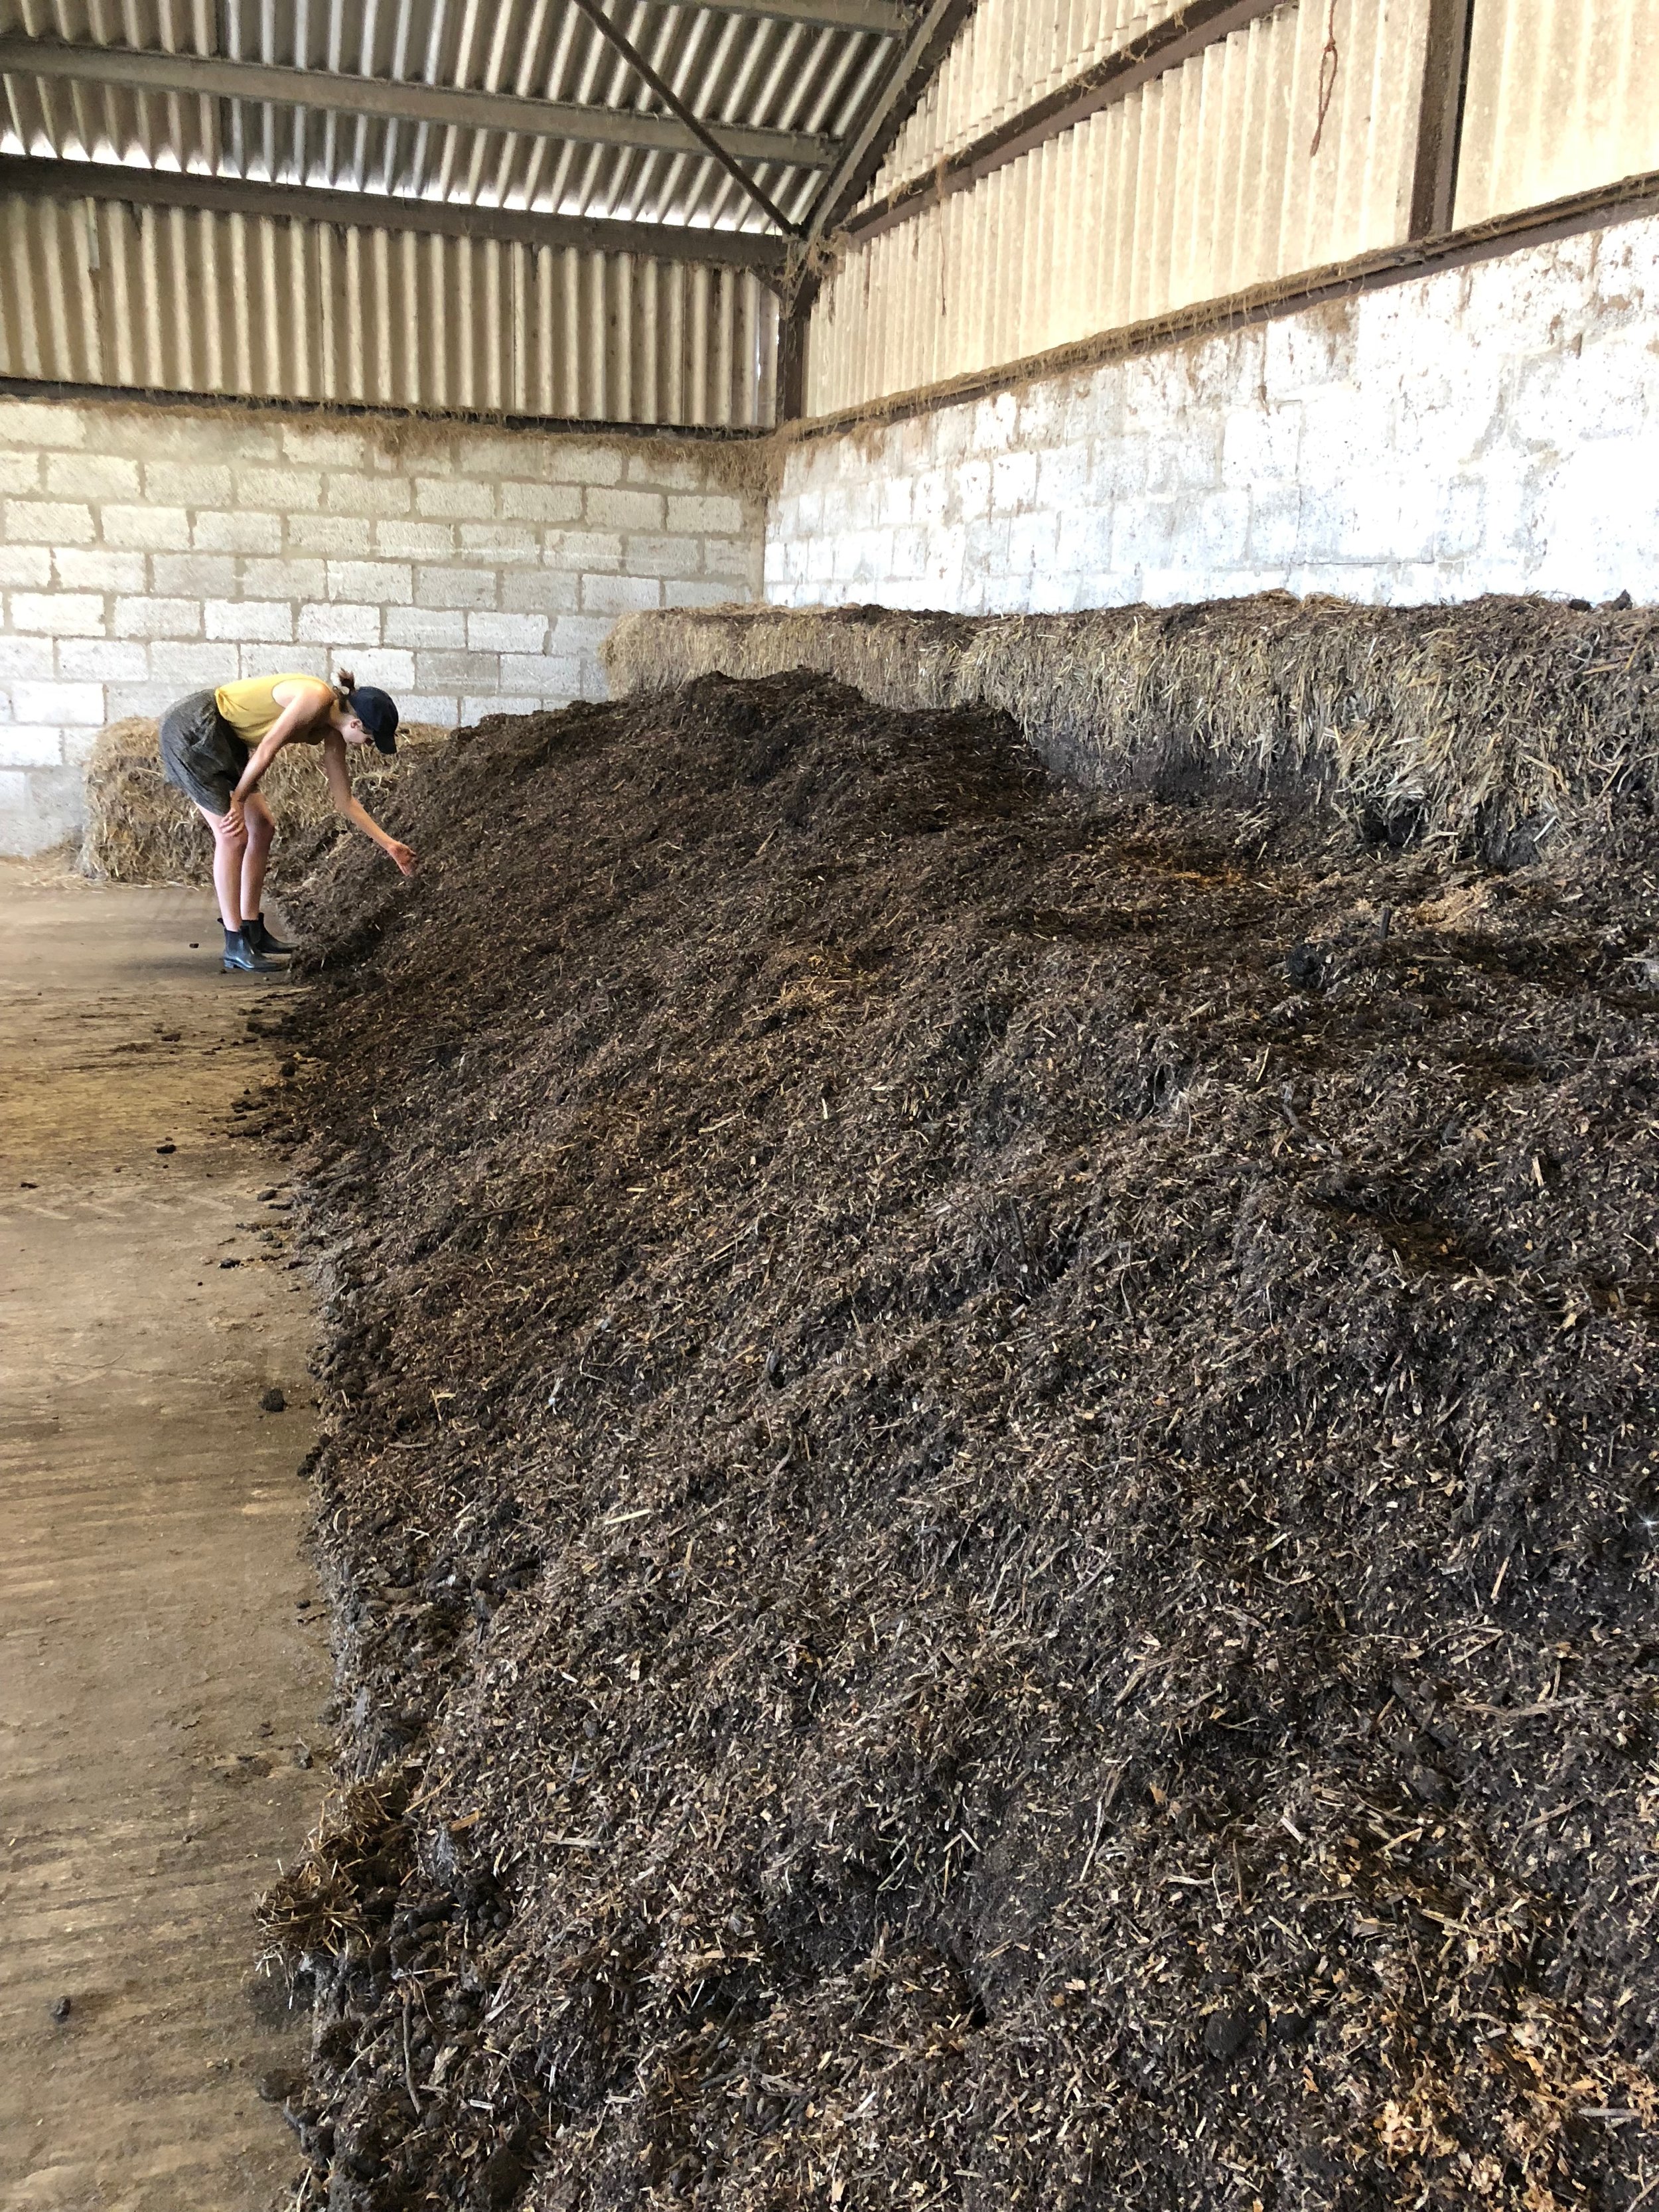 Row of turned compost with hay bales lining walls